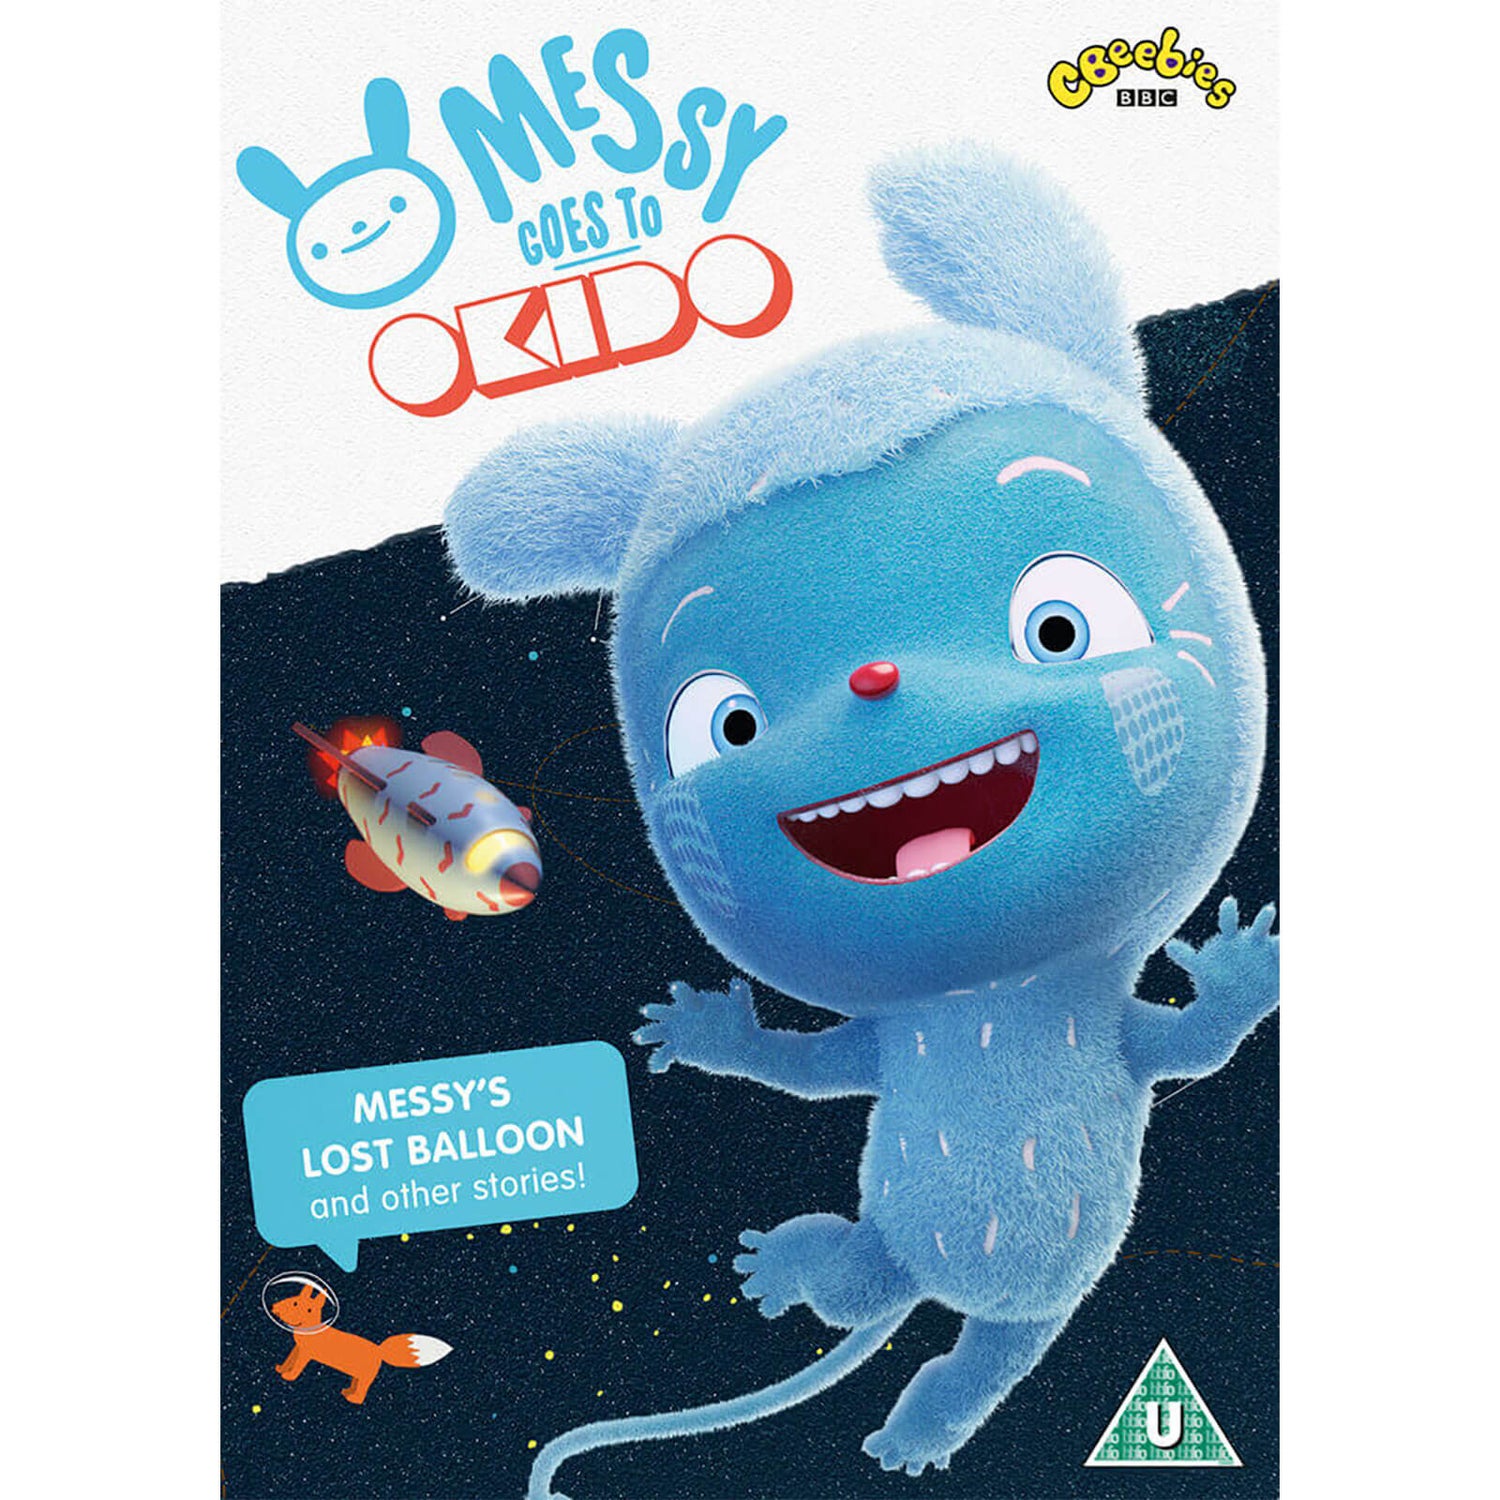 Messy Goes To Okido: Messy's Lost Balloon and other Stories